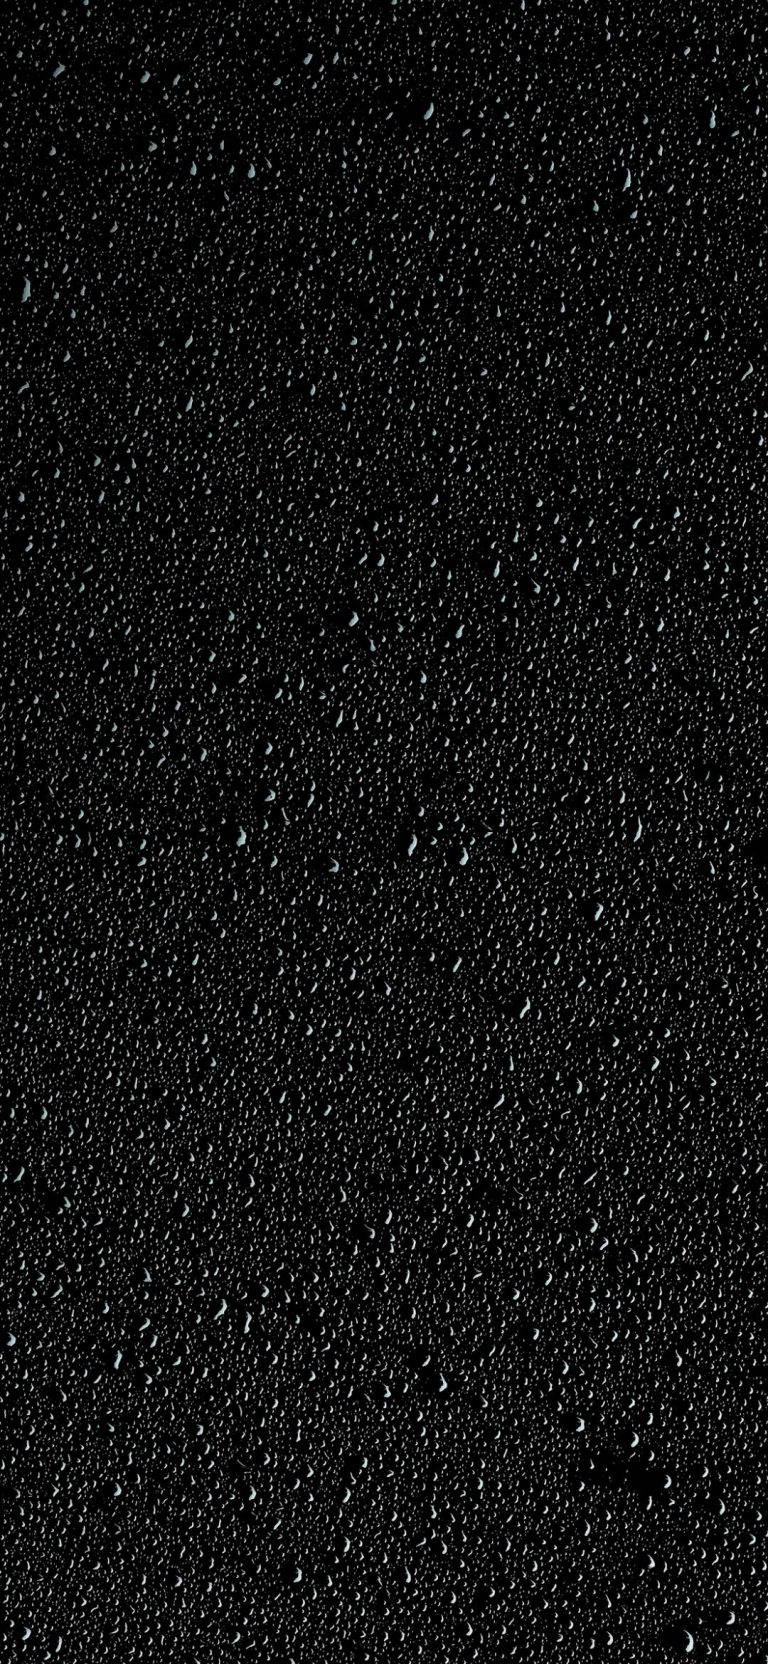 Black Water Droplets Iphone Whatsapp Background